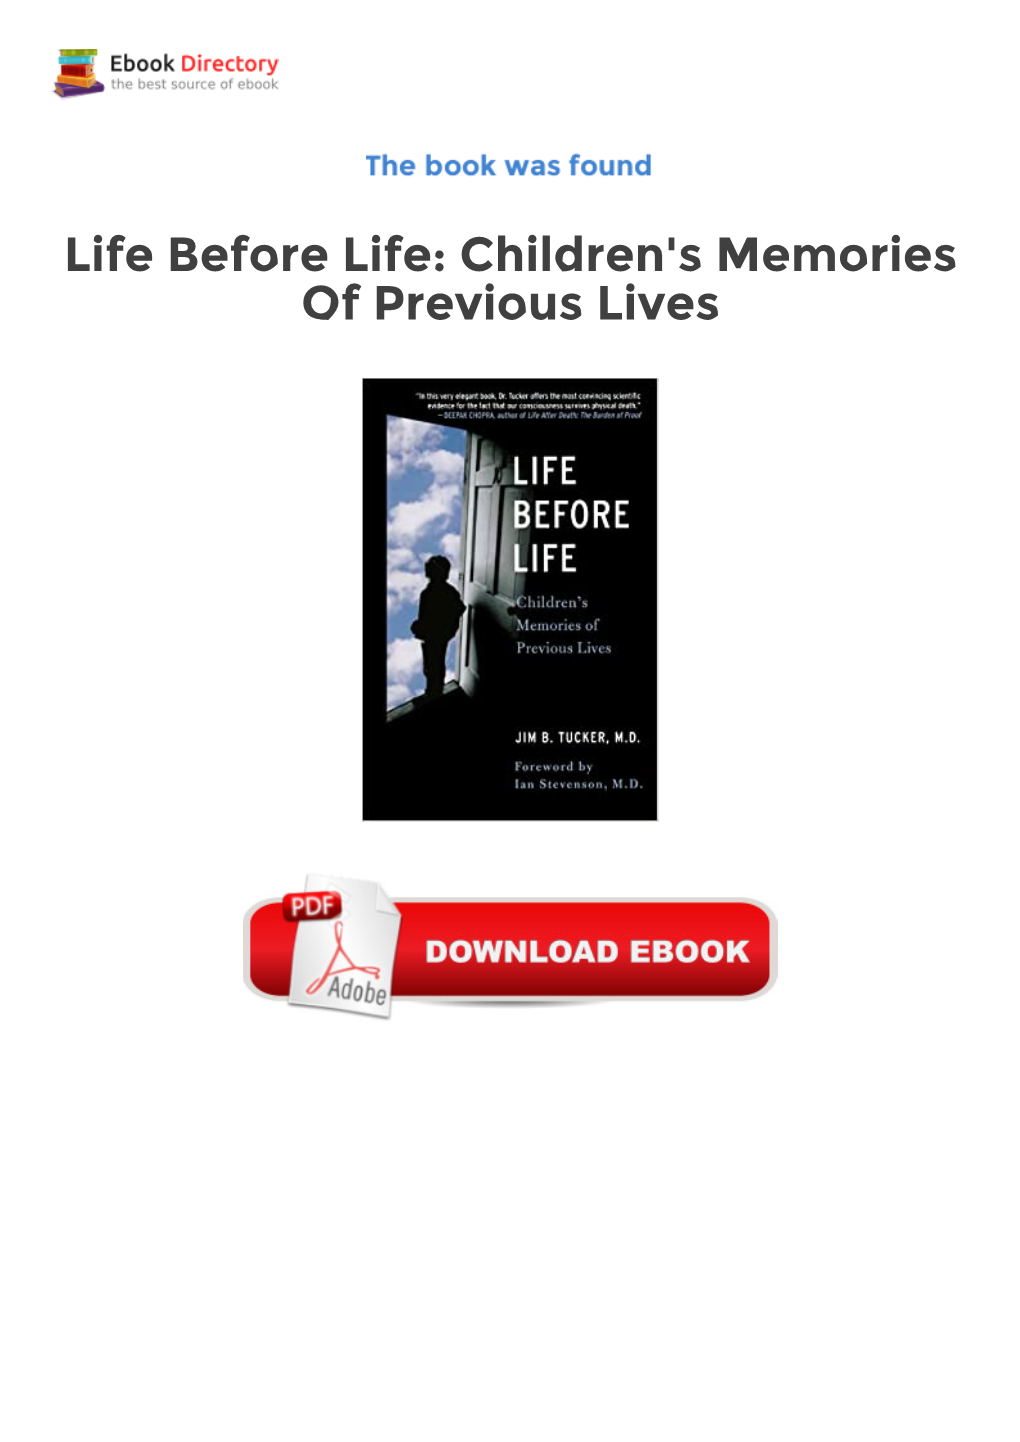 Free Downloads Life Before Life: Children's Memories of Previous